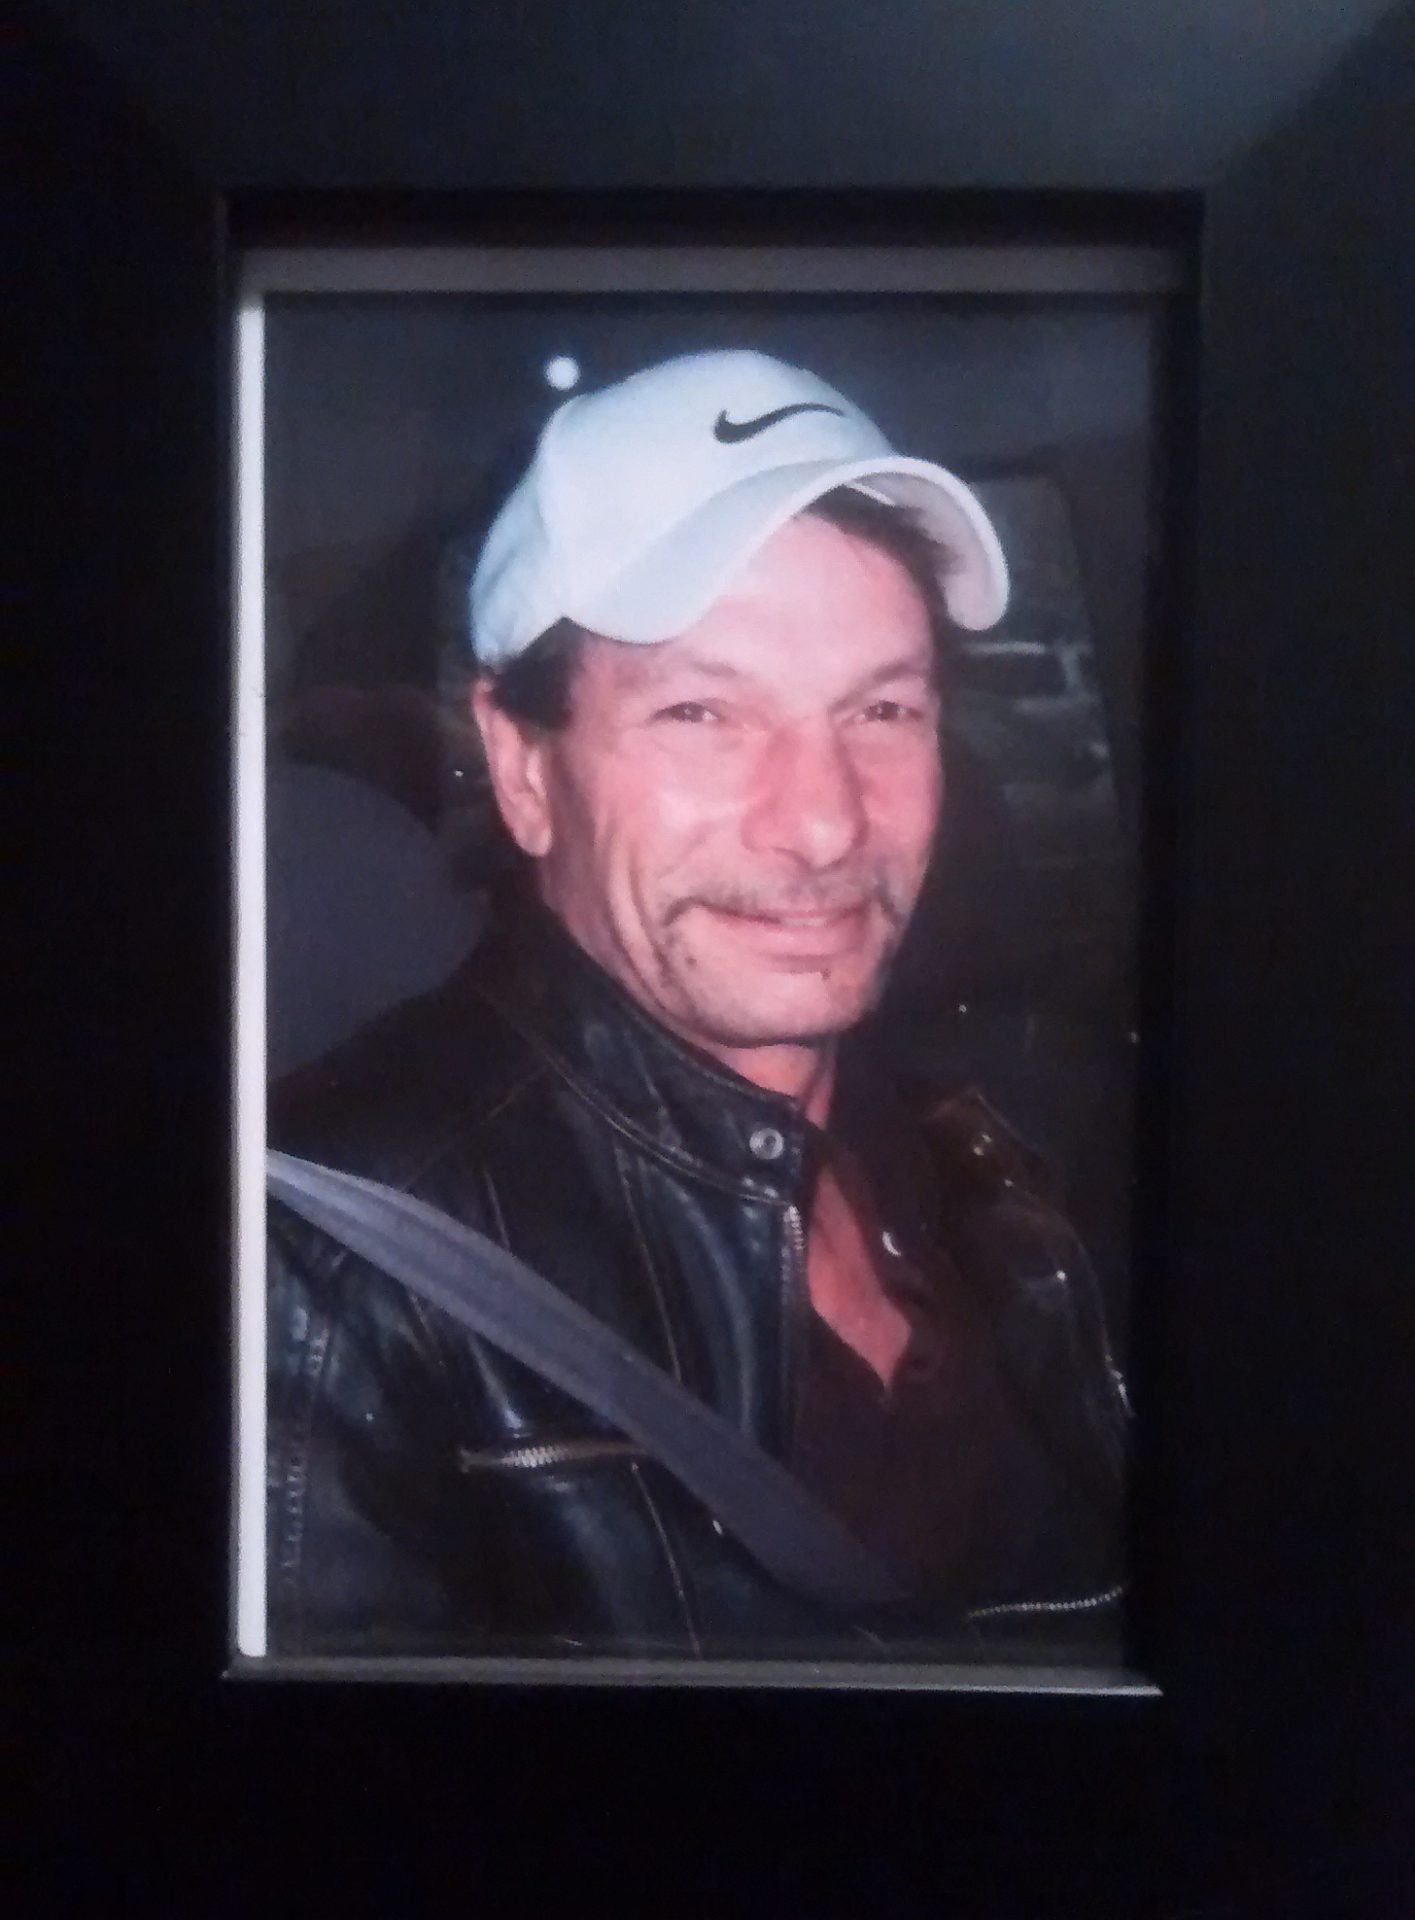 Nanaimo RCMP looking for missing 60-year-old man